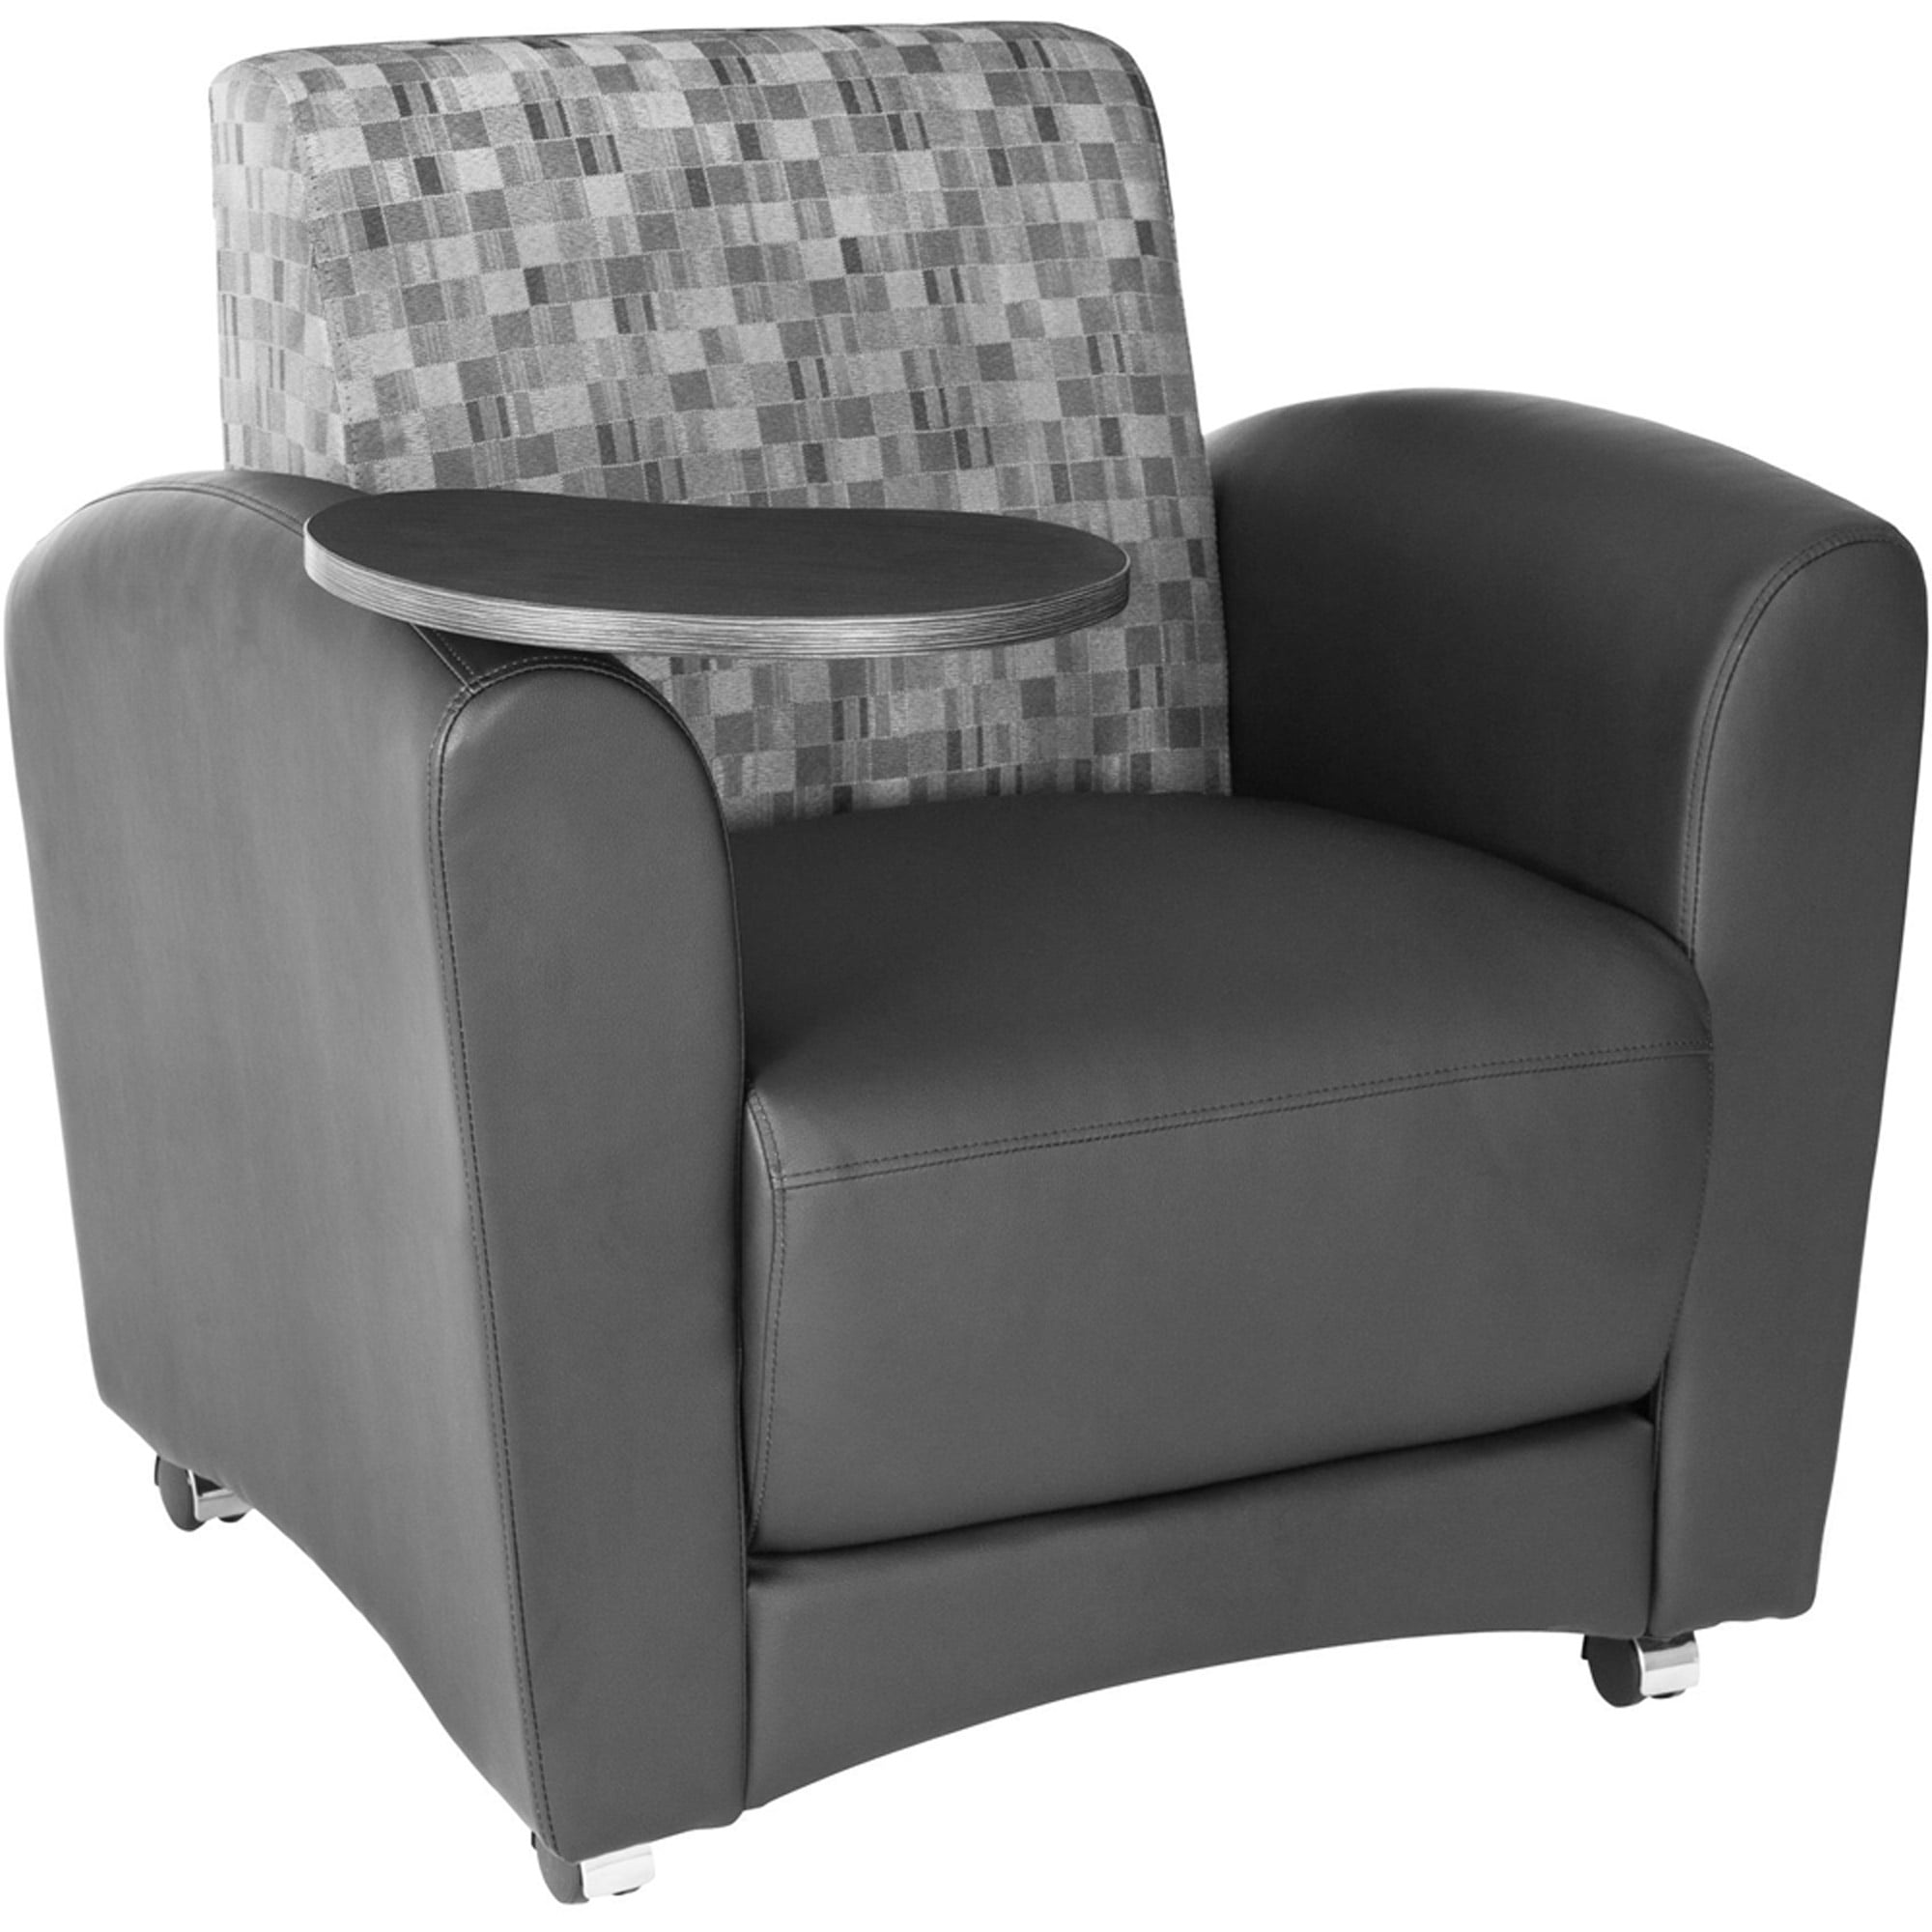 OFM Social Seating Vinyl Guest Reception Waiting Room Chair with Single